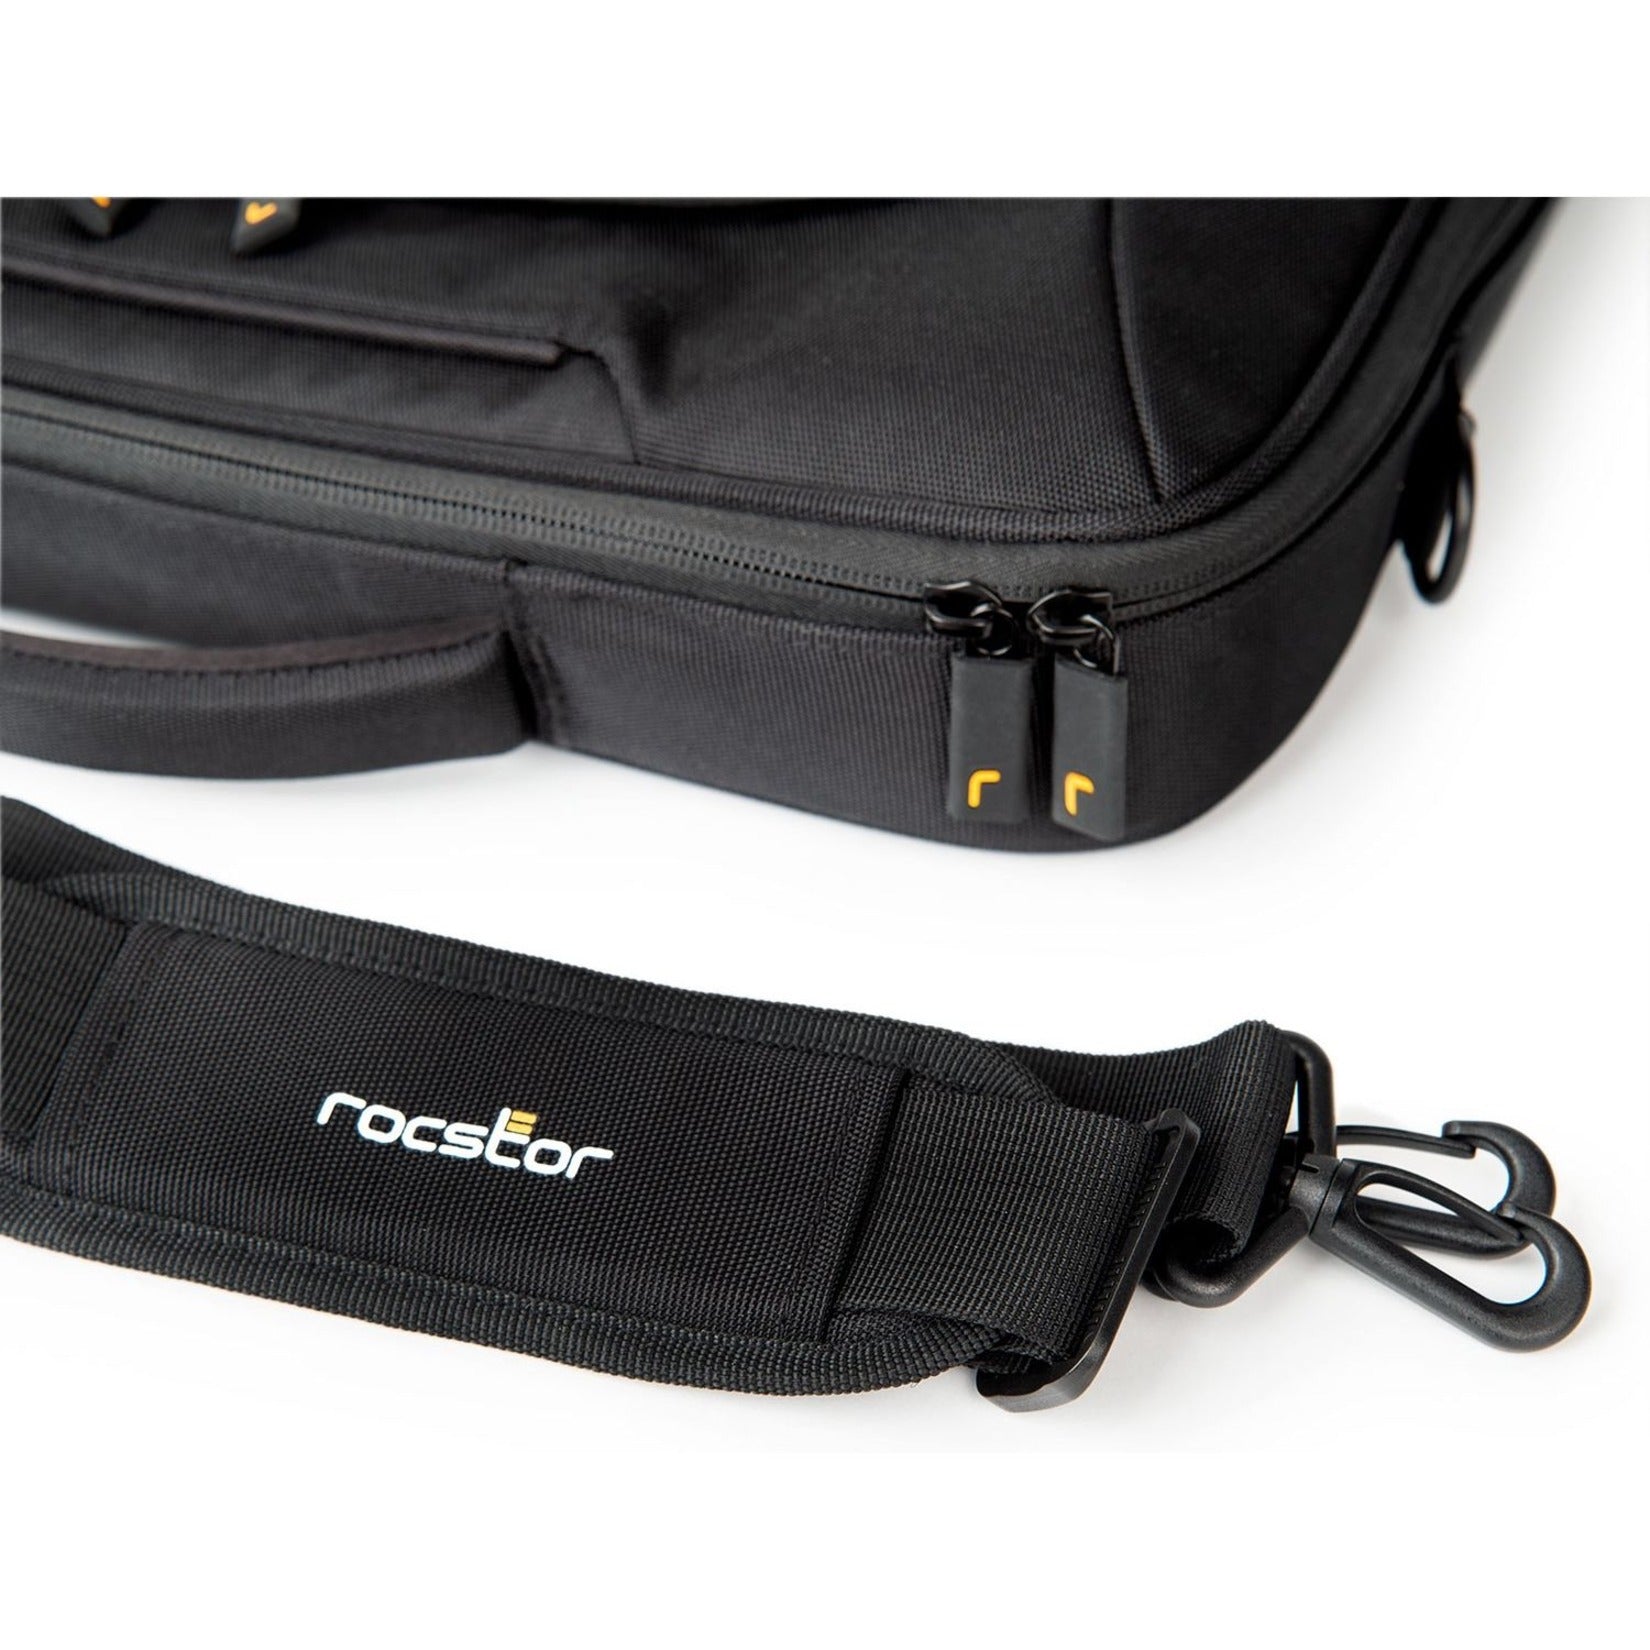 Rocstor Y1CC004-B1 Premium Universal Laptop Carrying Sleeve, Fits up to 16" Laptop, RFID Pocket, Water Resistant